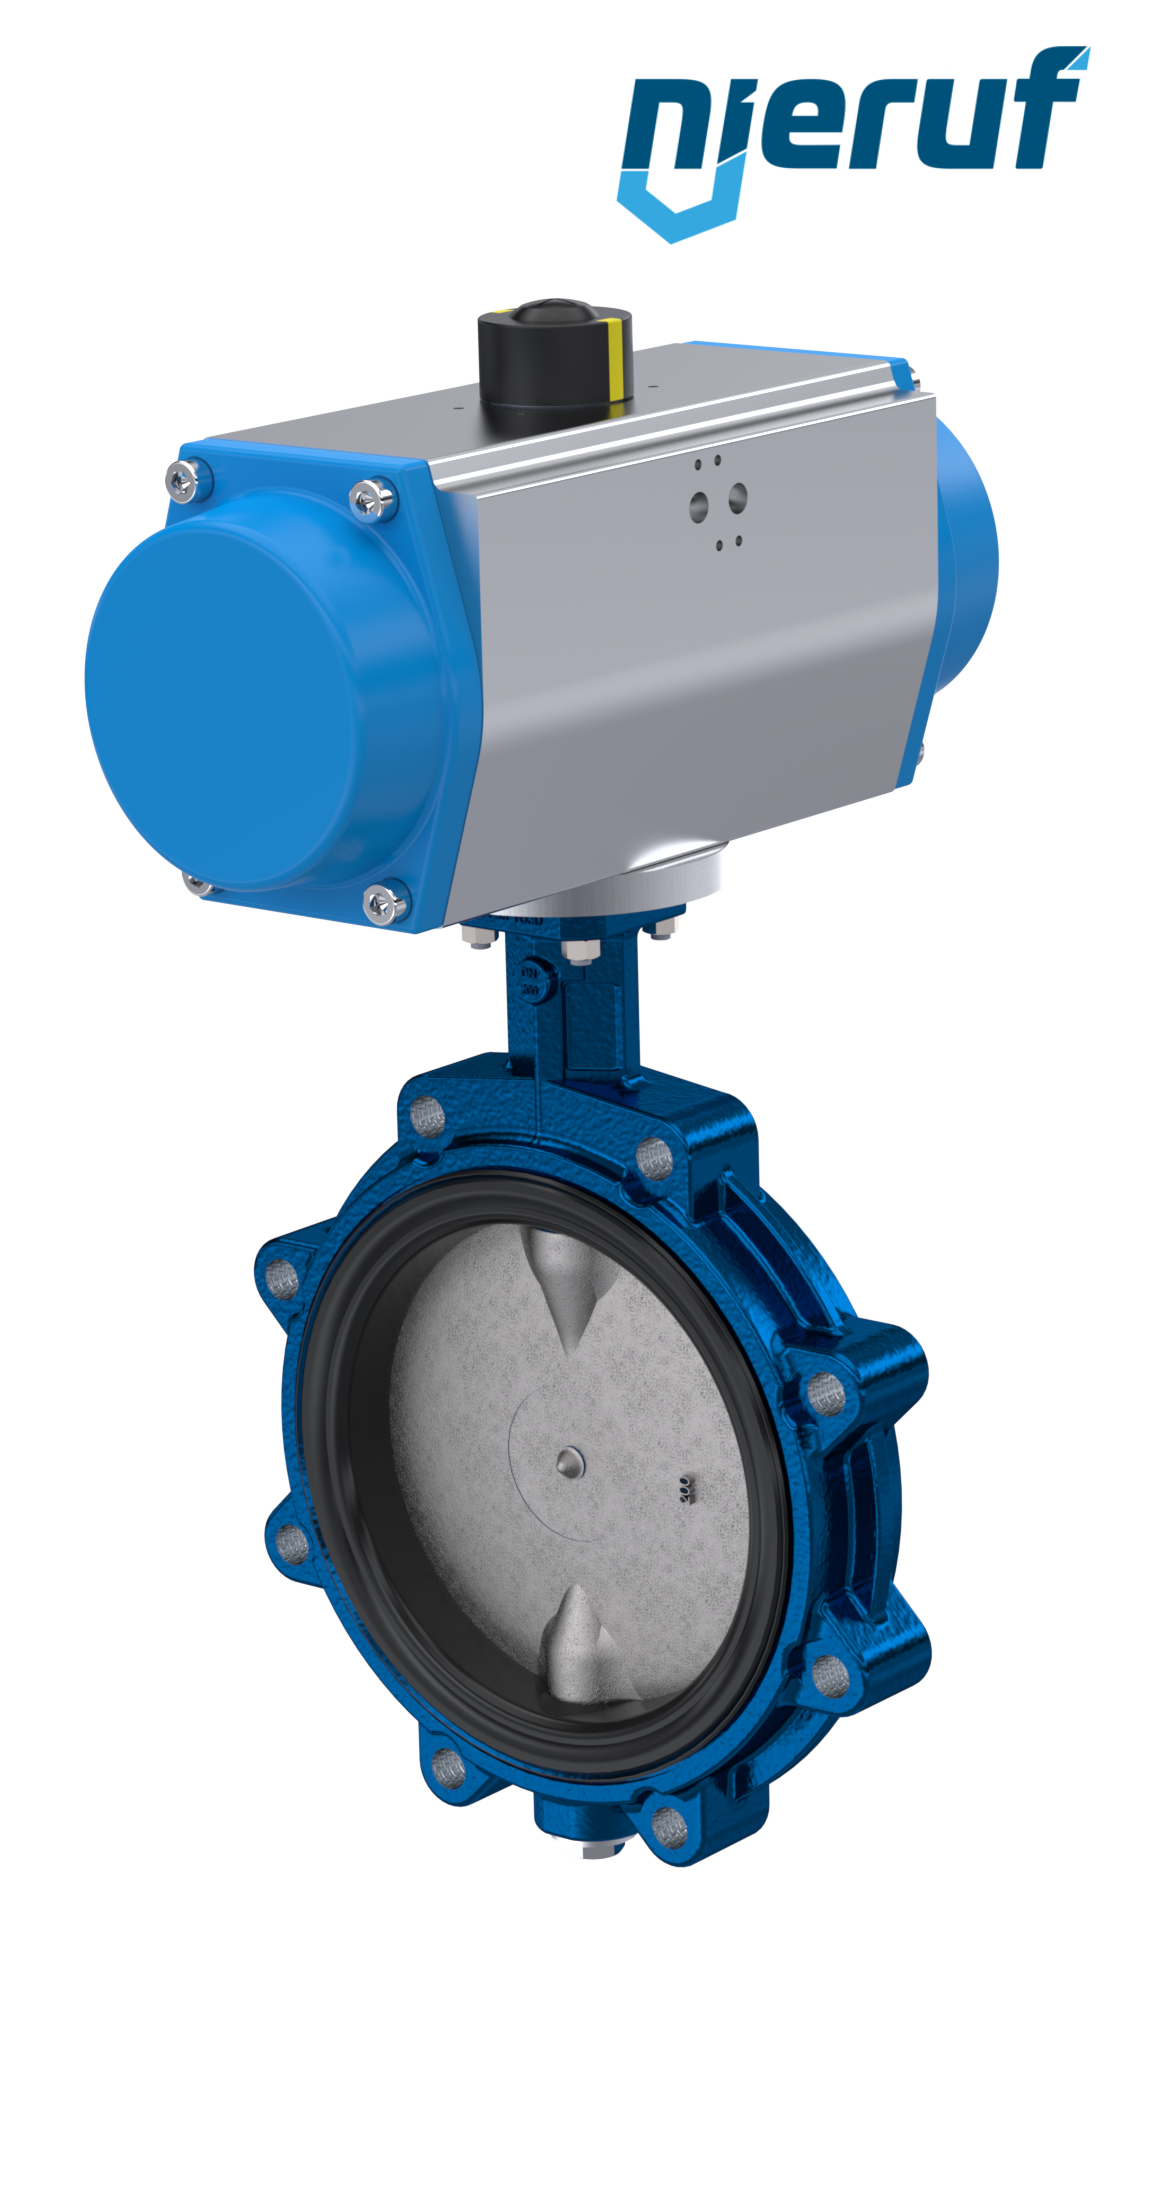 Butterfly valve DN 125 AK02 EPDM DVGW drinking water, WRAS, ACS, W270 pneumatic actuator single acting